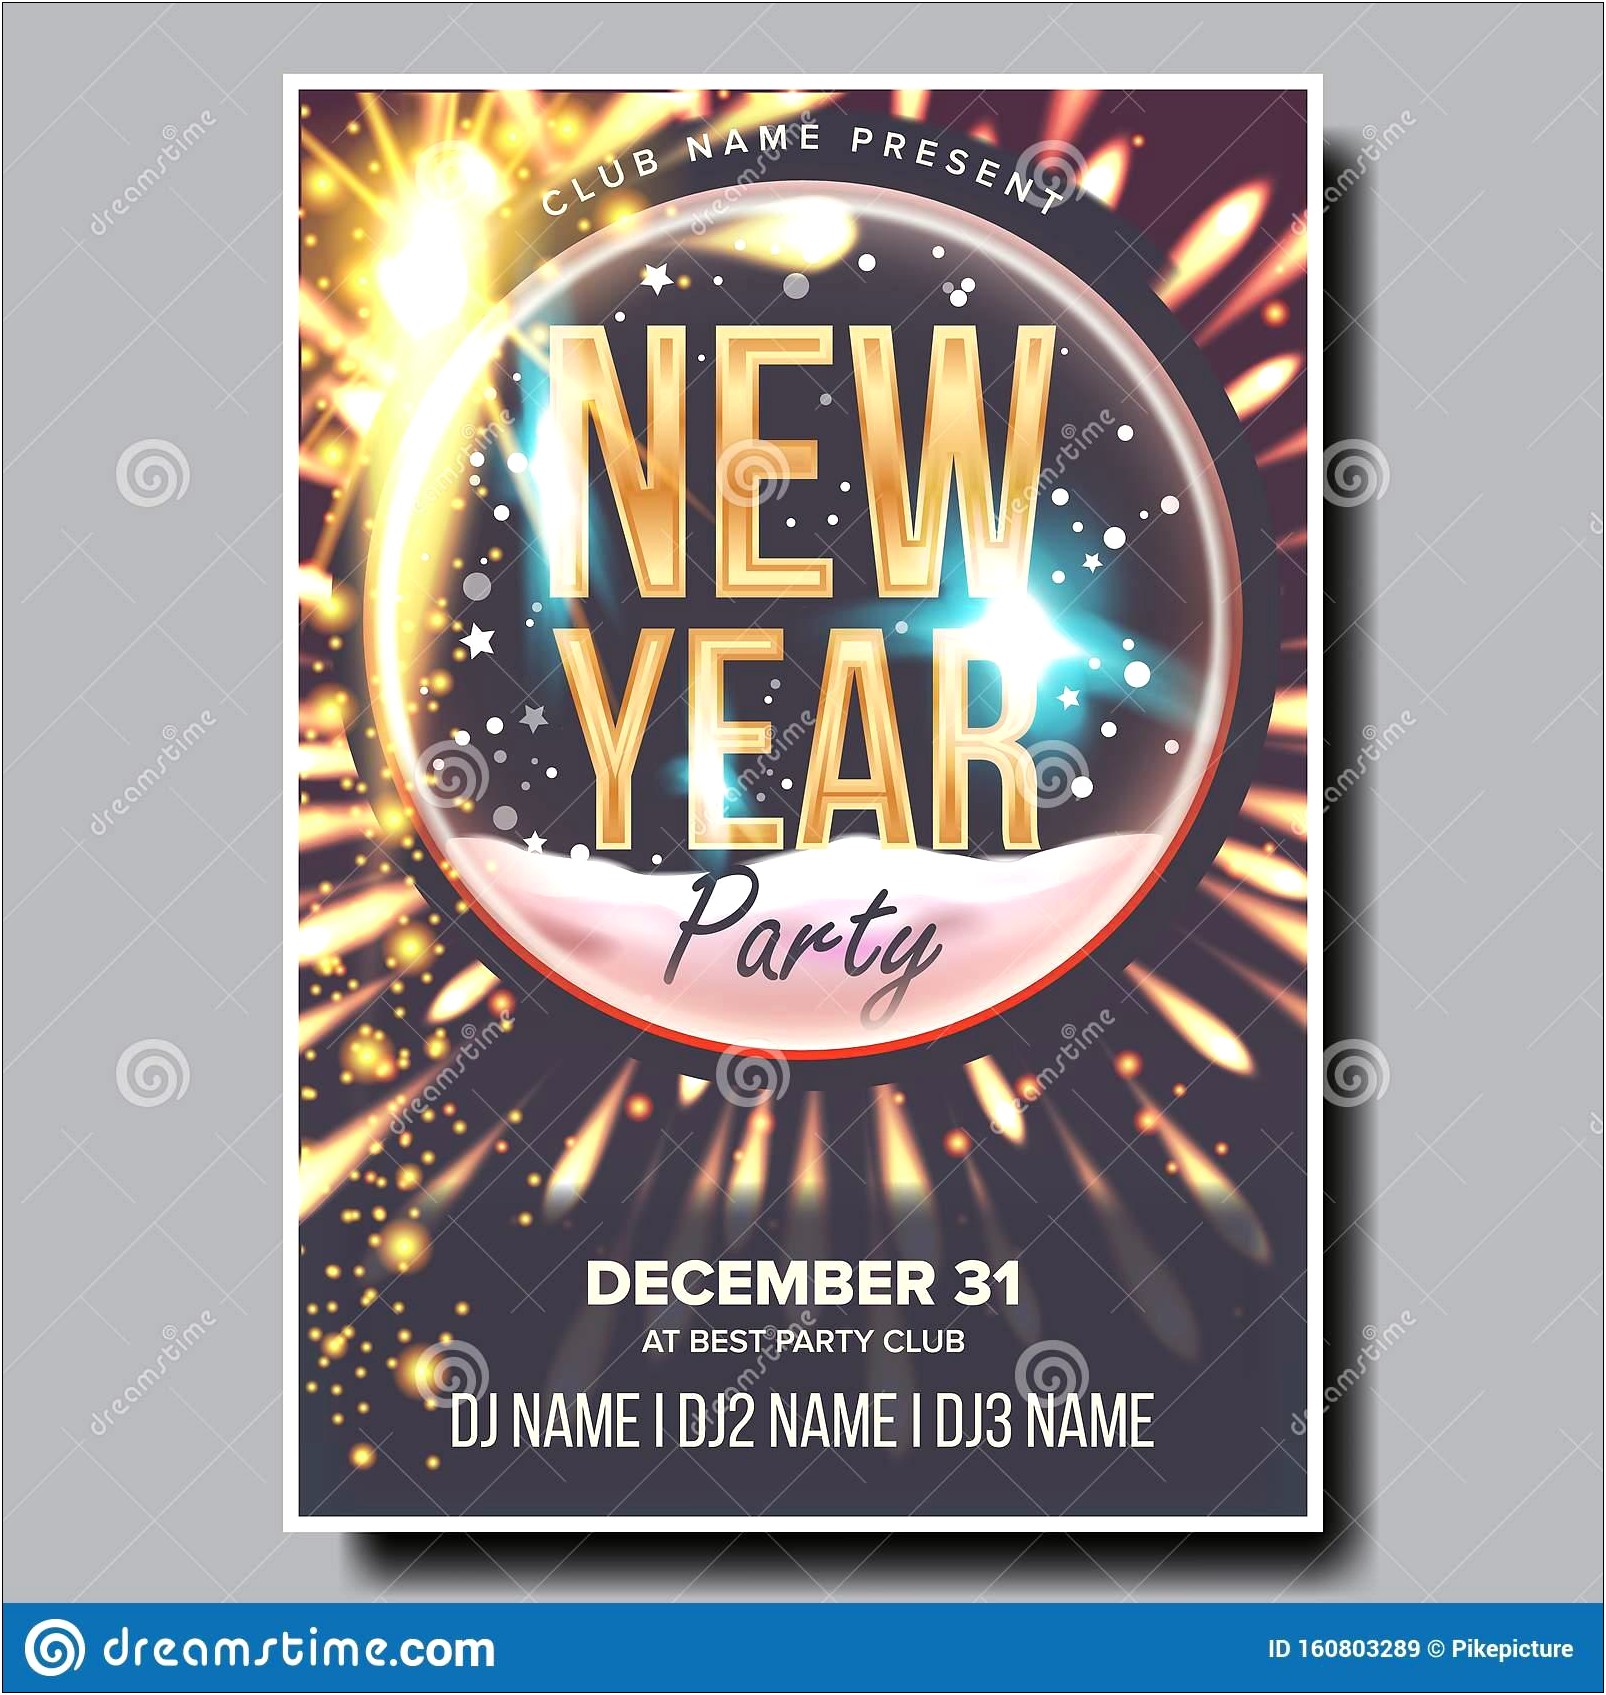 Free Template For Holiday Party Flyer